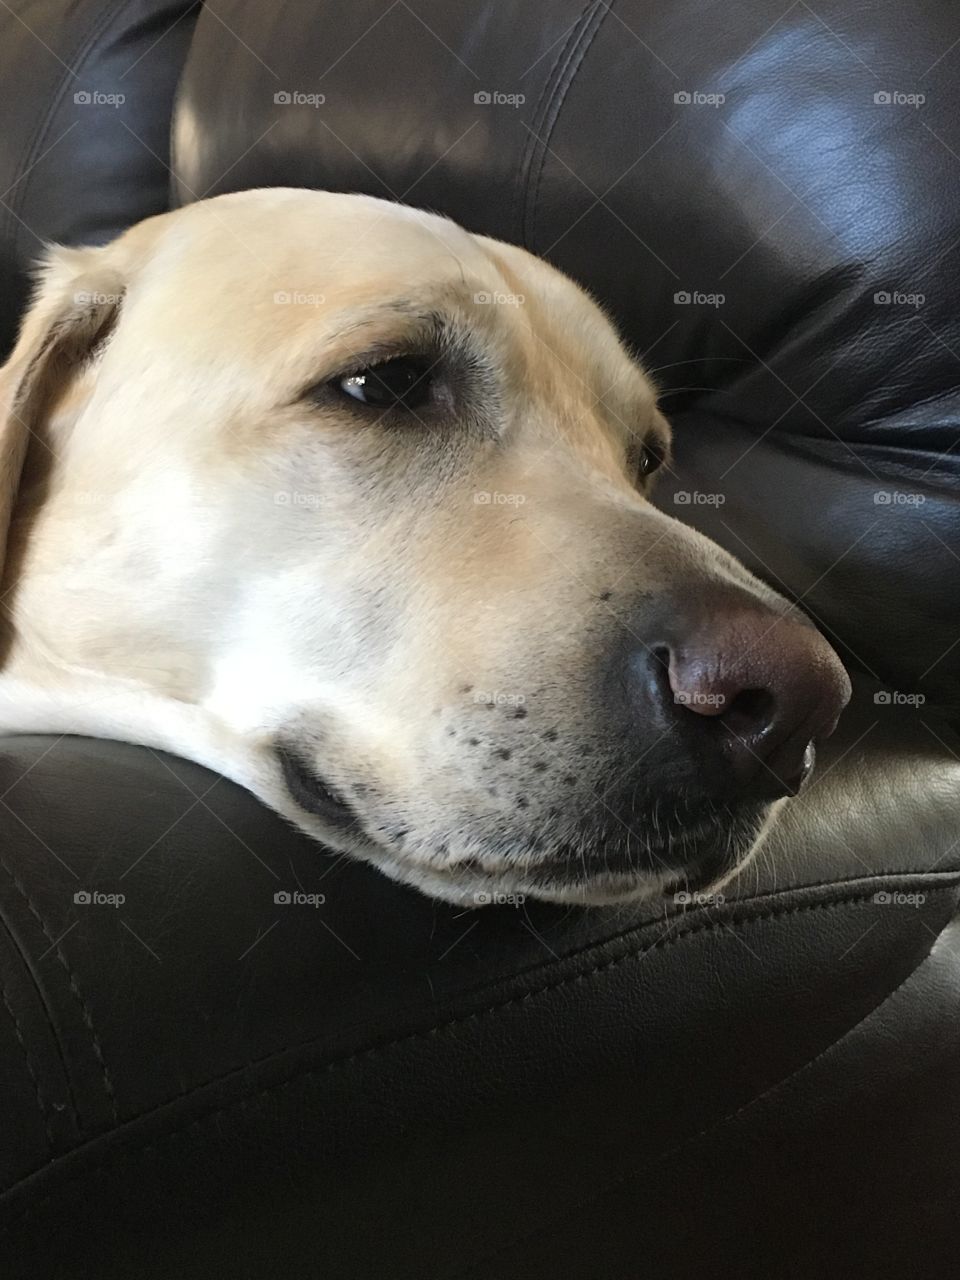 A beautiful dog resting his head on a couch.